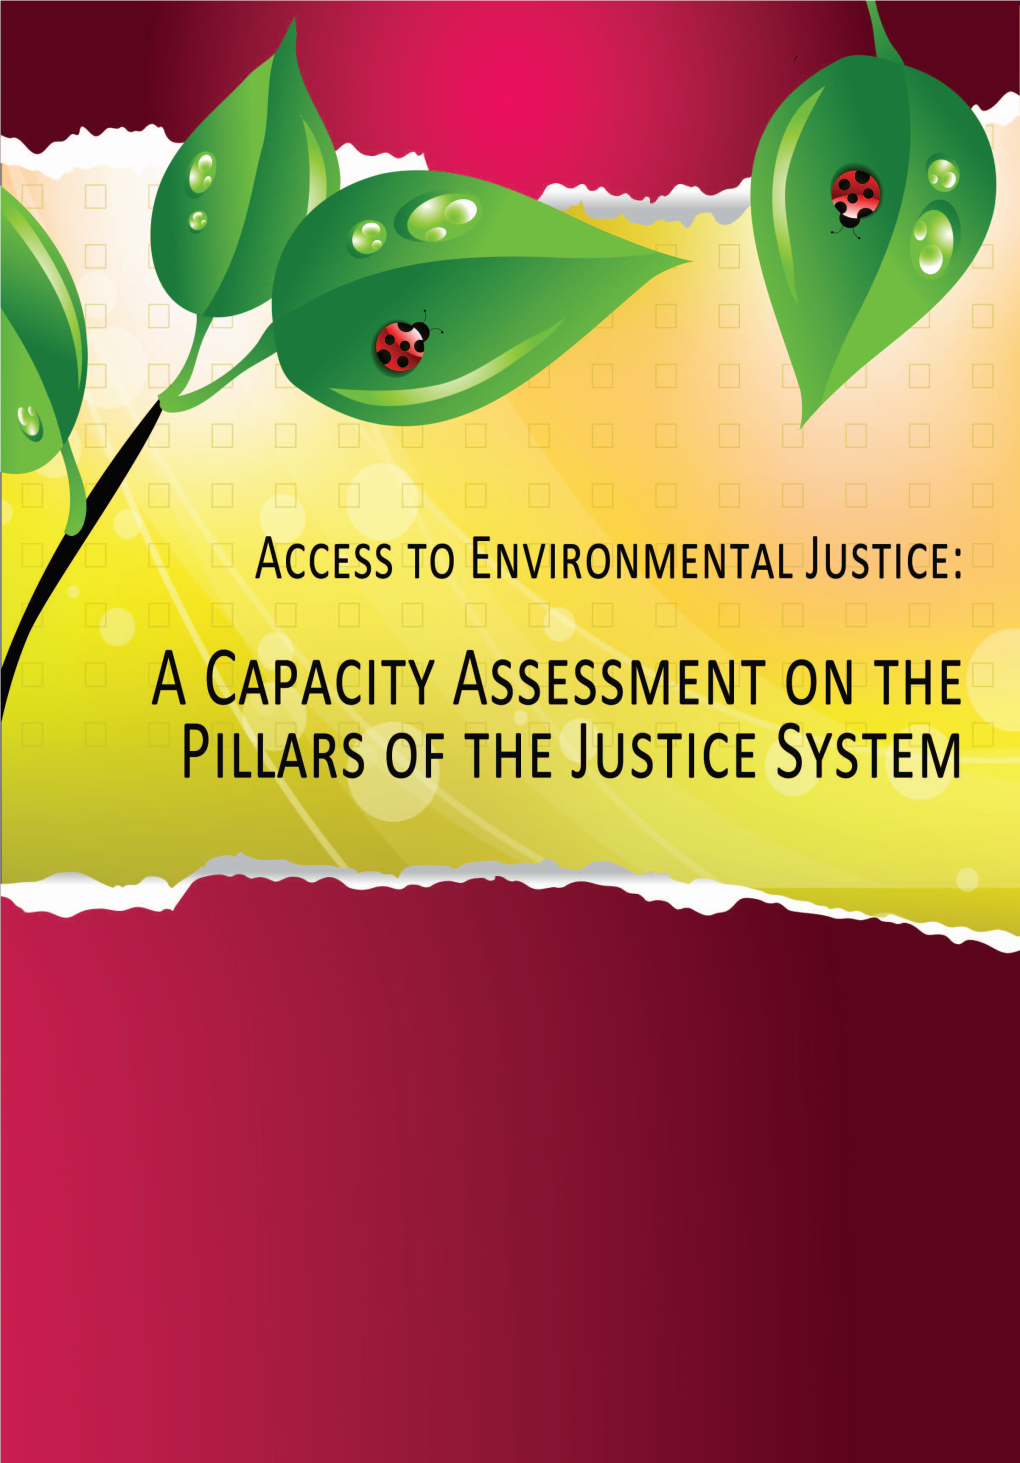 A CAPACITY ASSESSMENT on the PILLARS of the JUSTICE SYSTEM I